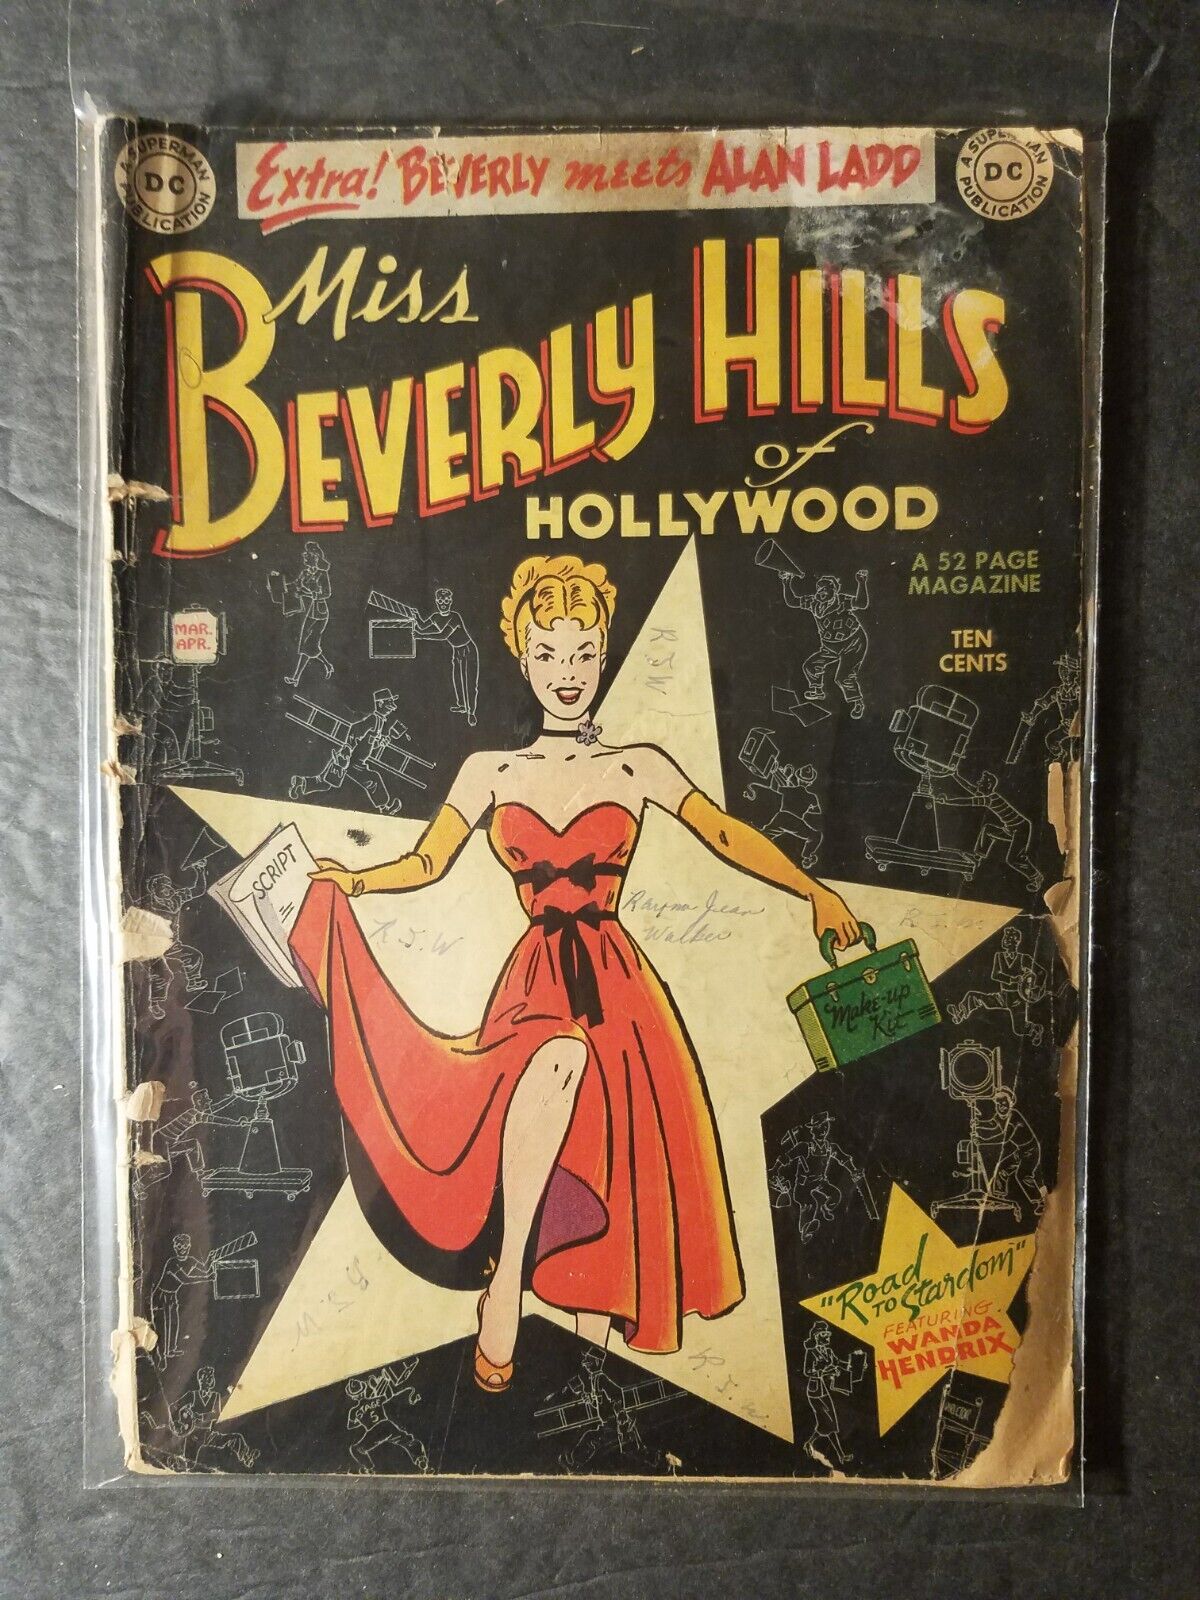 Miss Beverly Hills of Hollywood #1  Golden Age PRE CODE DC Comic Book 1949